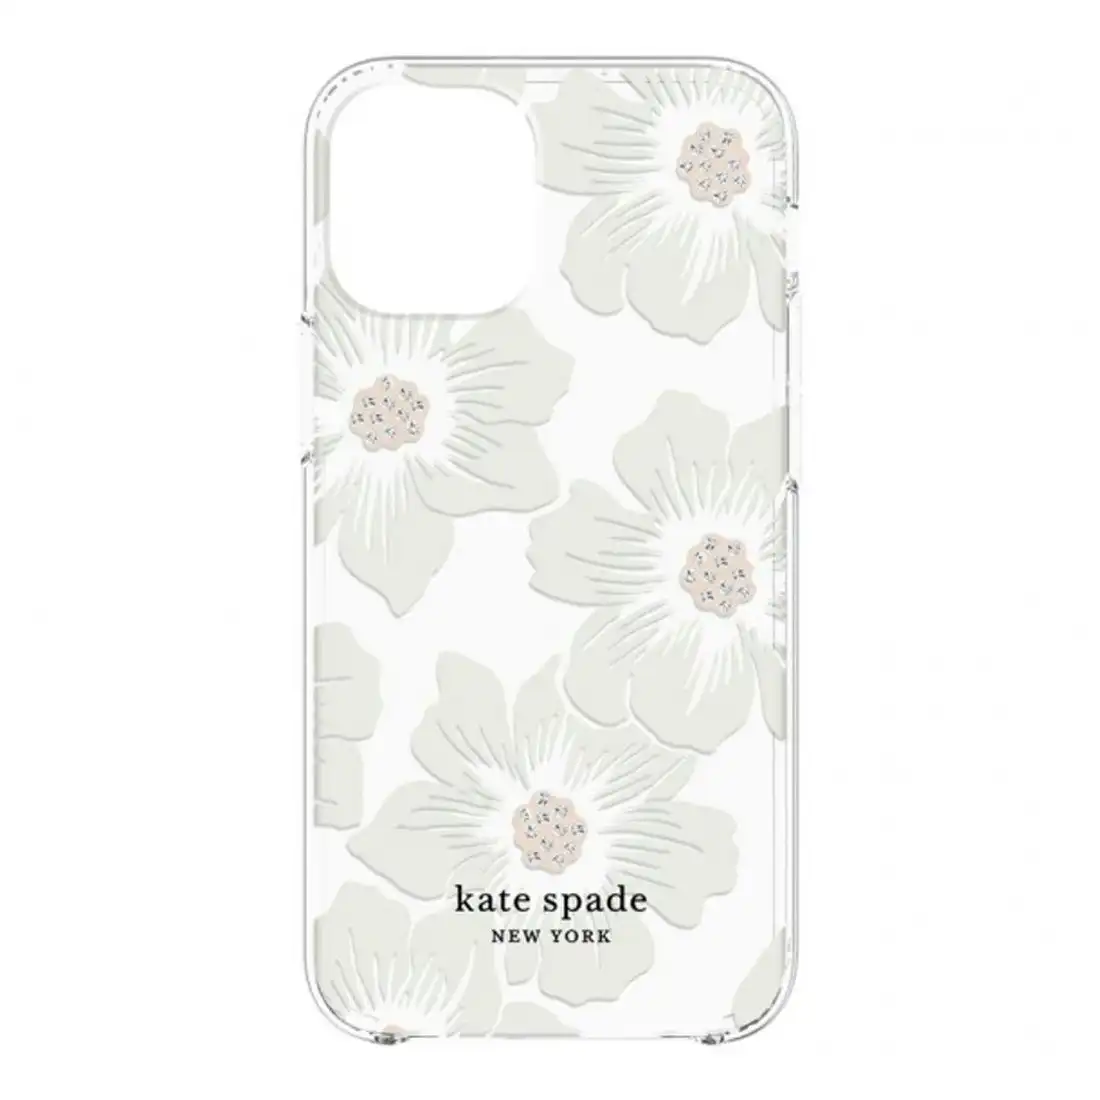 Kate Spade New York Protective Hardshell Case for iPhone 12 Mini - Hollyhock Floral Clear